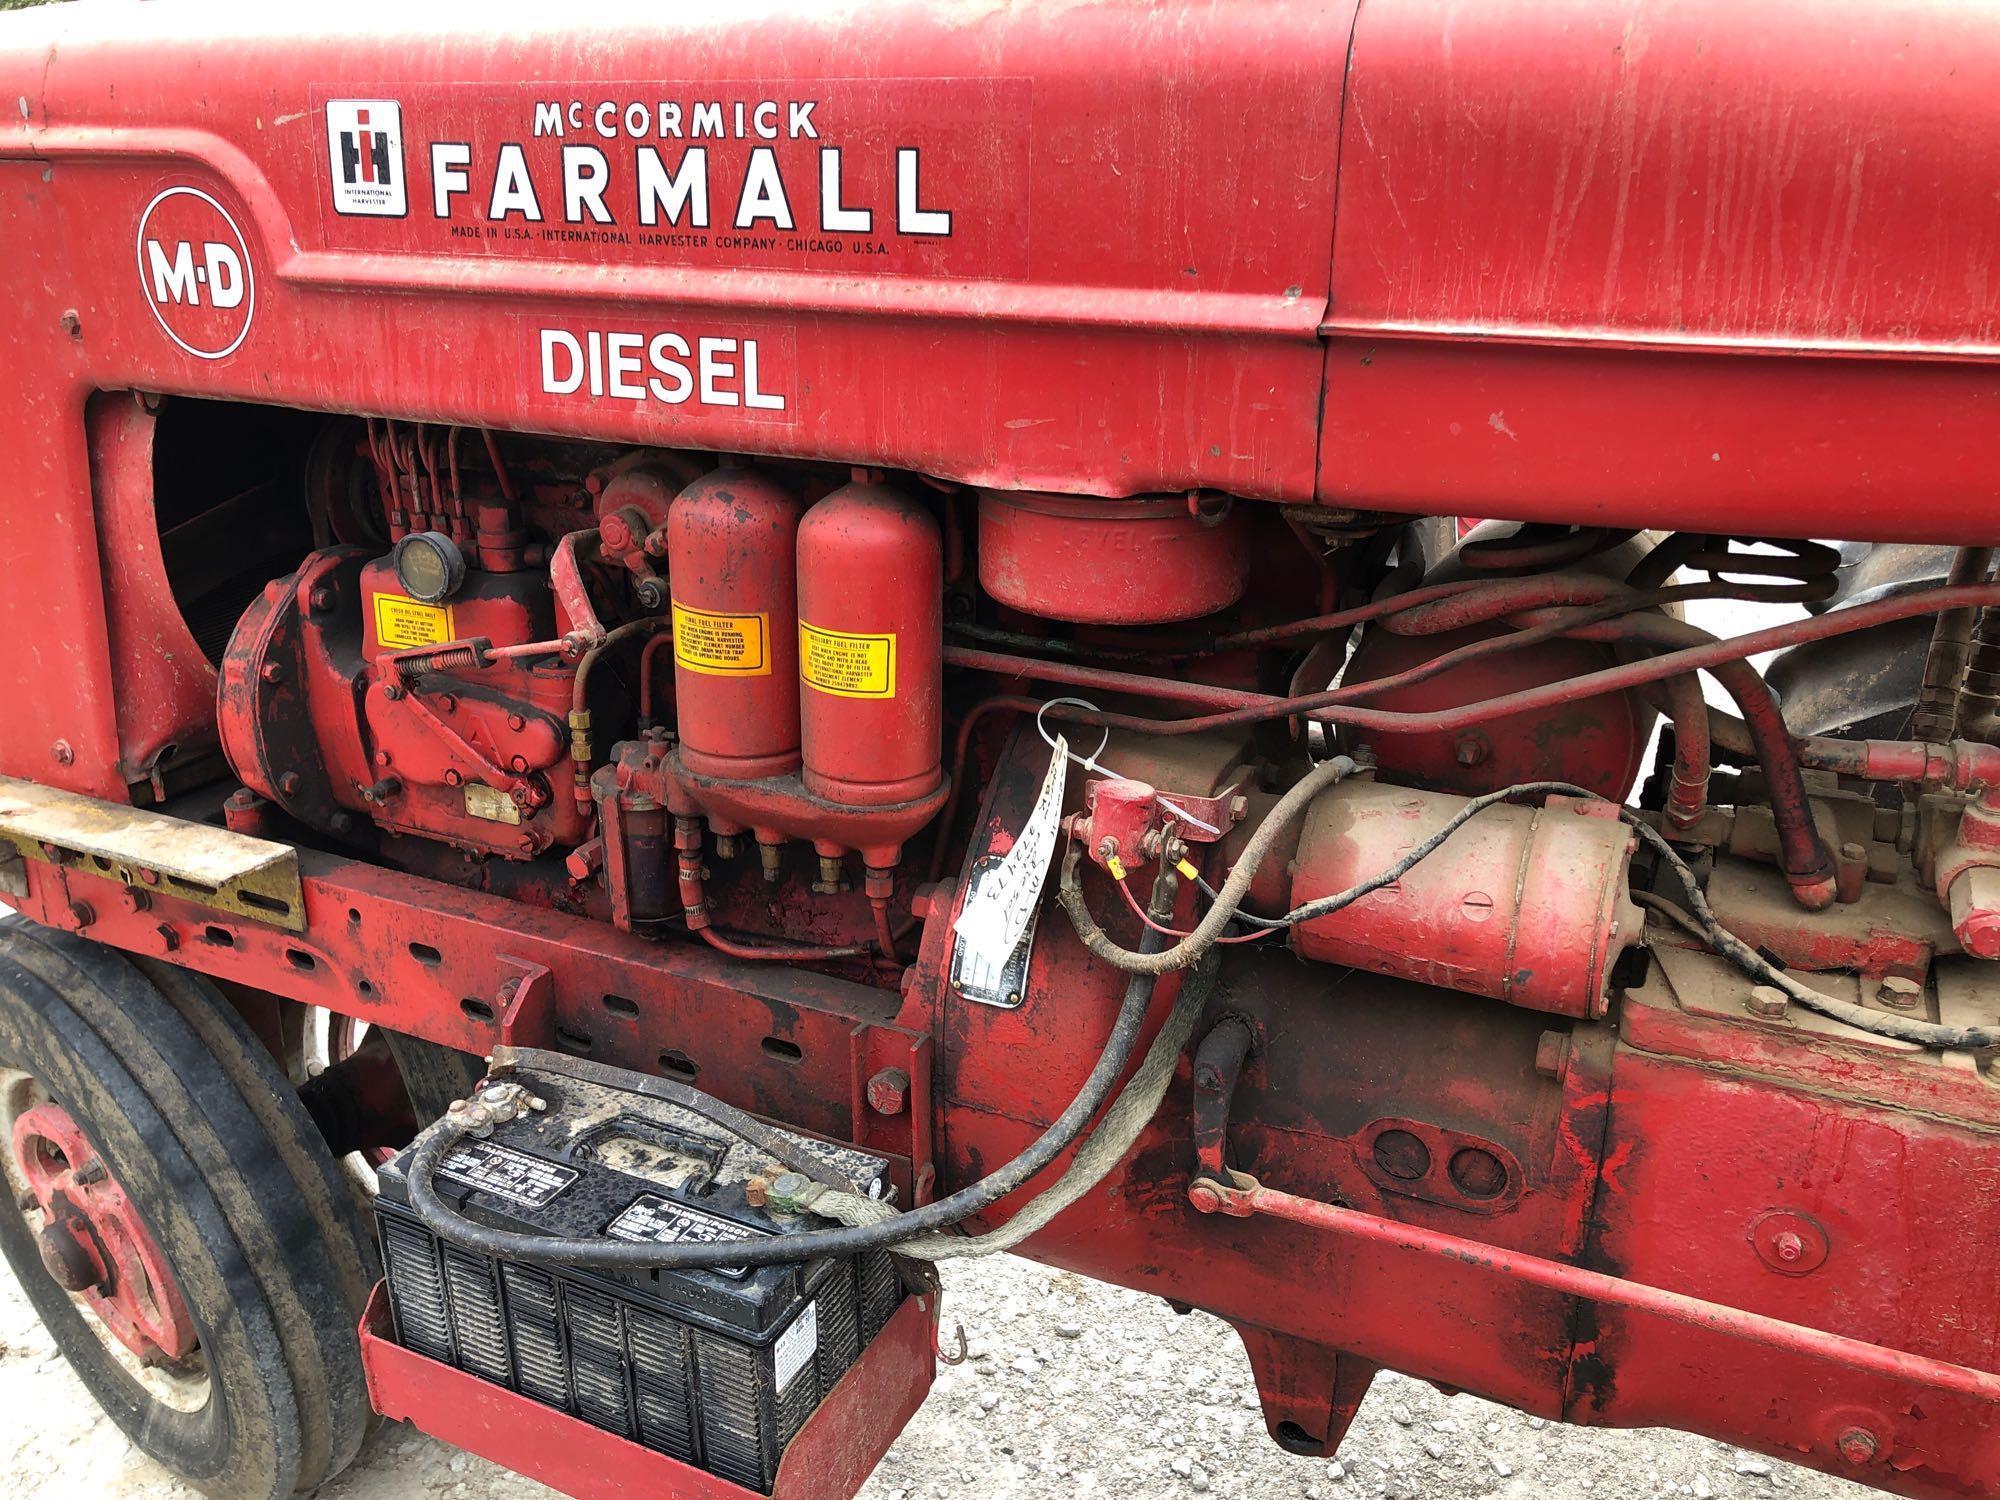 Farmall M-D Narrow Front Tractor with Sprayer & Weights, Diesel, SN:FDBK272473